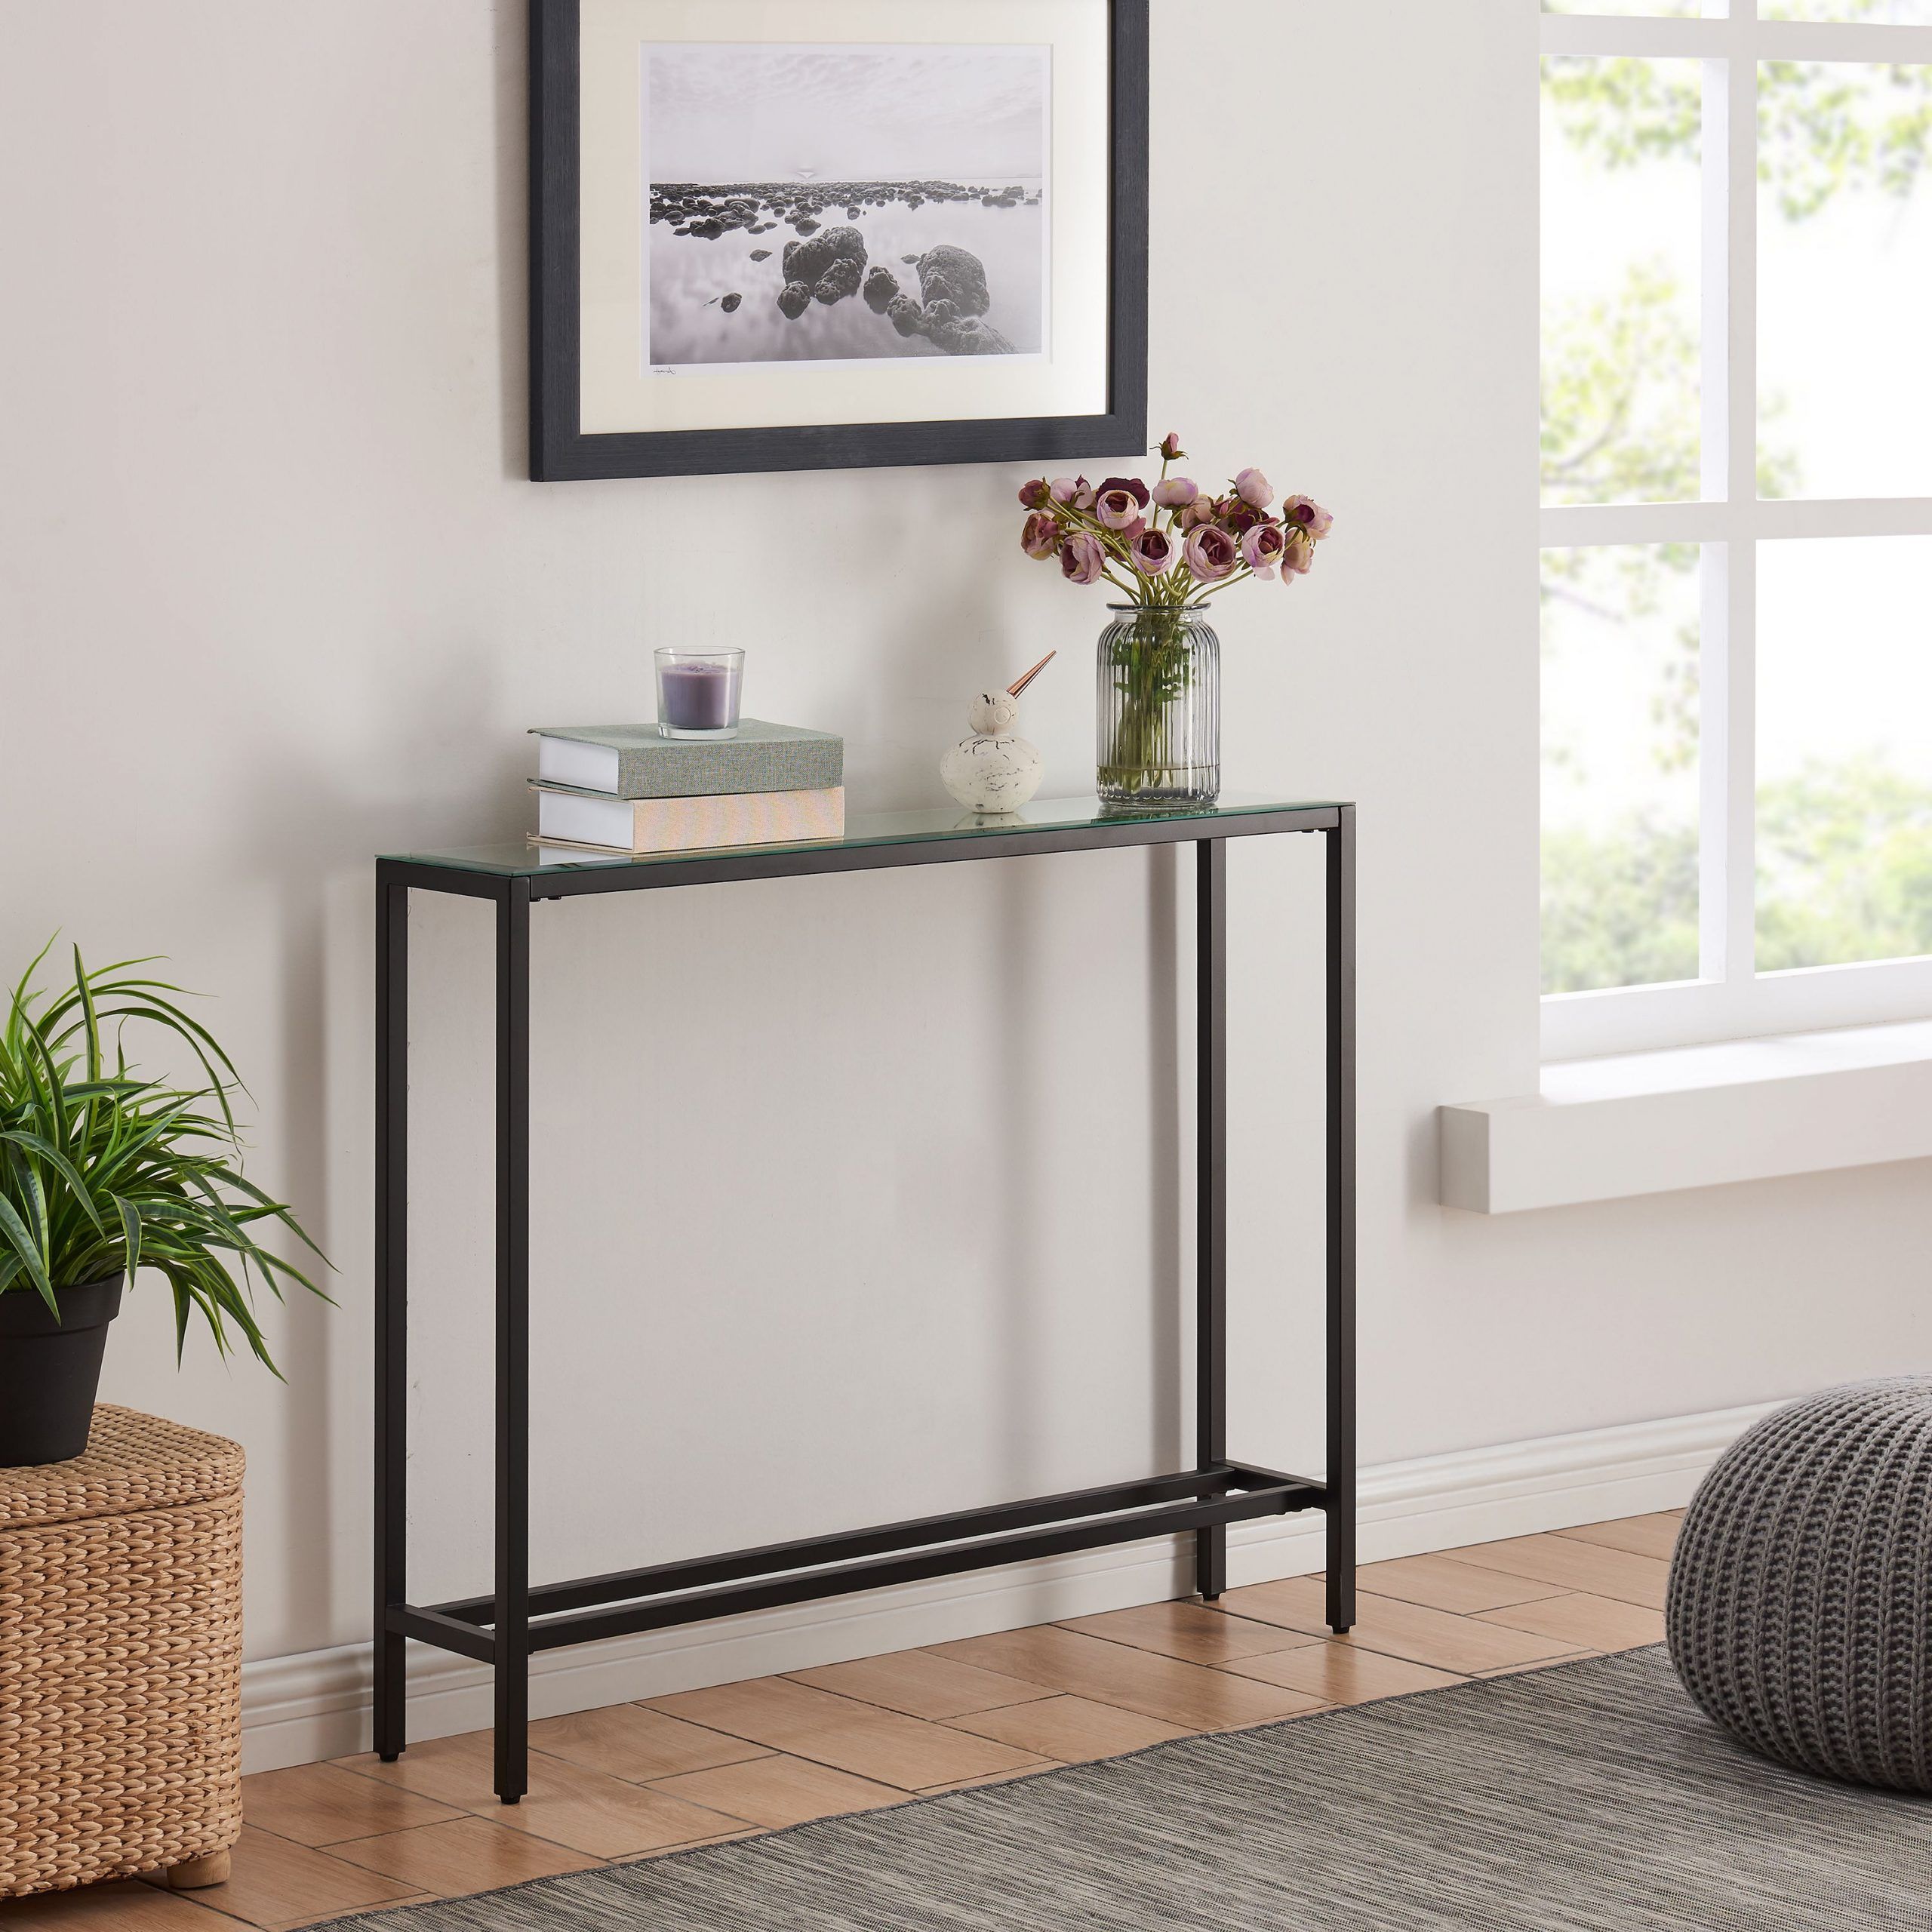 Derkkin Narrow Mini Console Table, Transitional, Black With Recent Antique White Black Console Tables (View 8 of 10)